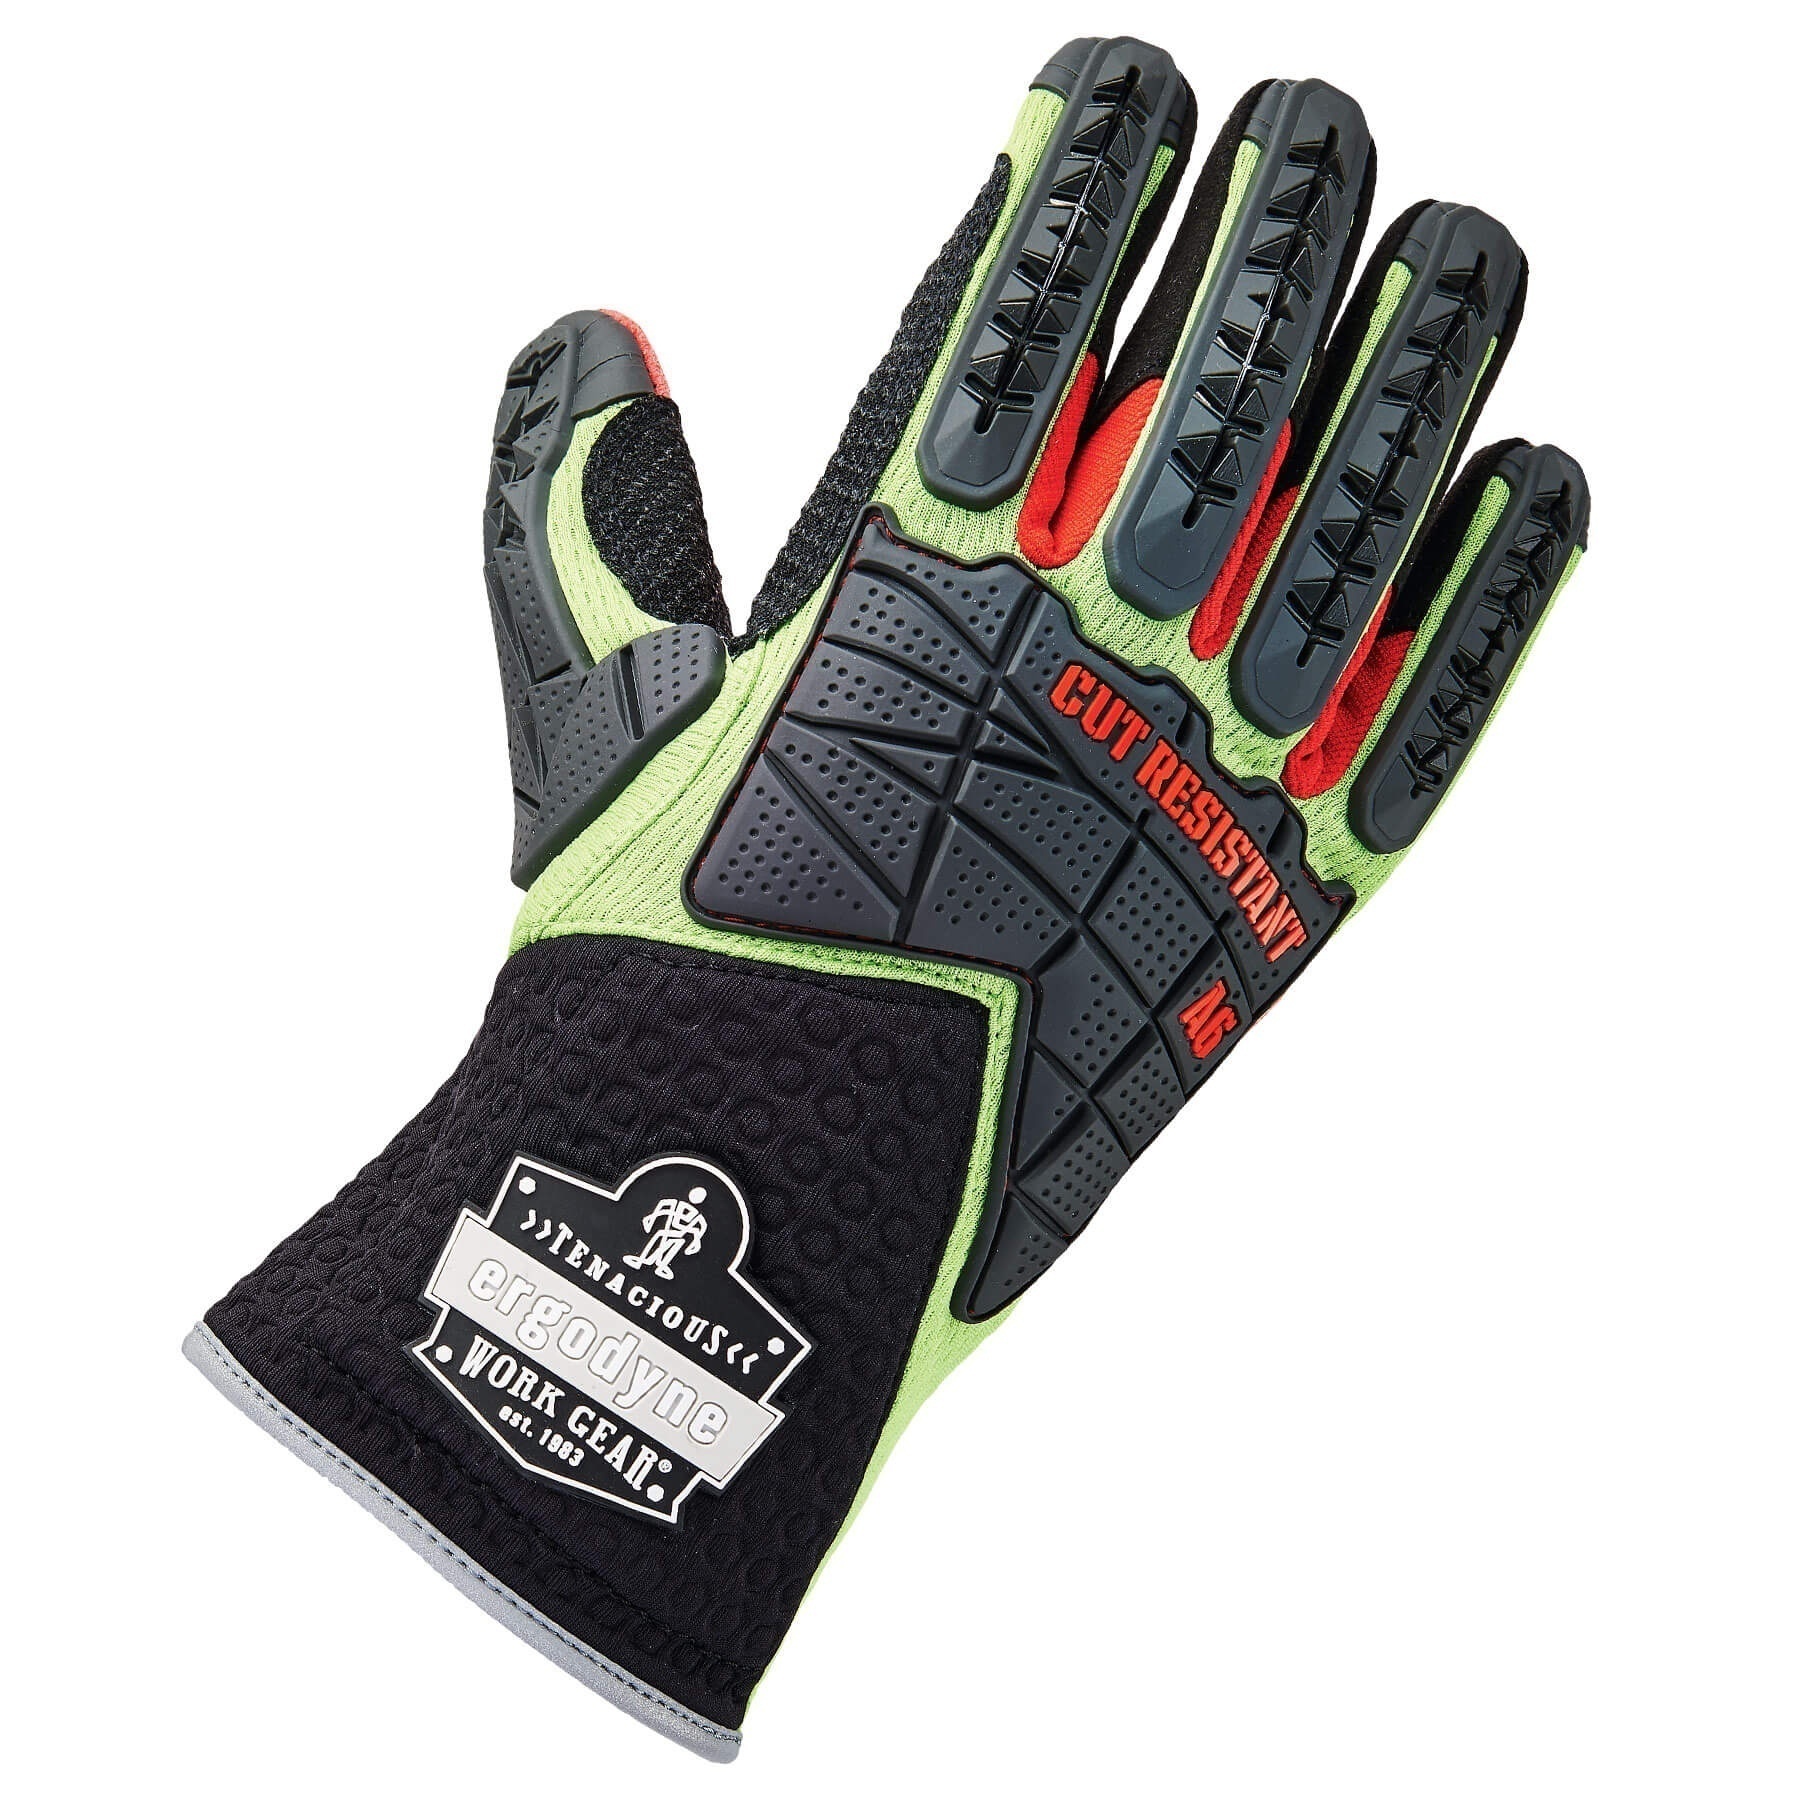 Ergodyne 925CR6 ProFlex Dorsal Impact-Reducing Cut-Resistant Gloves from Columbia Safety